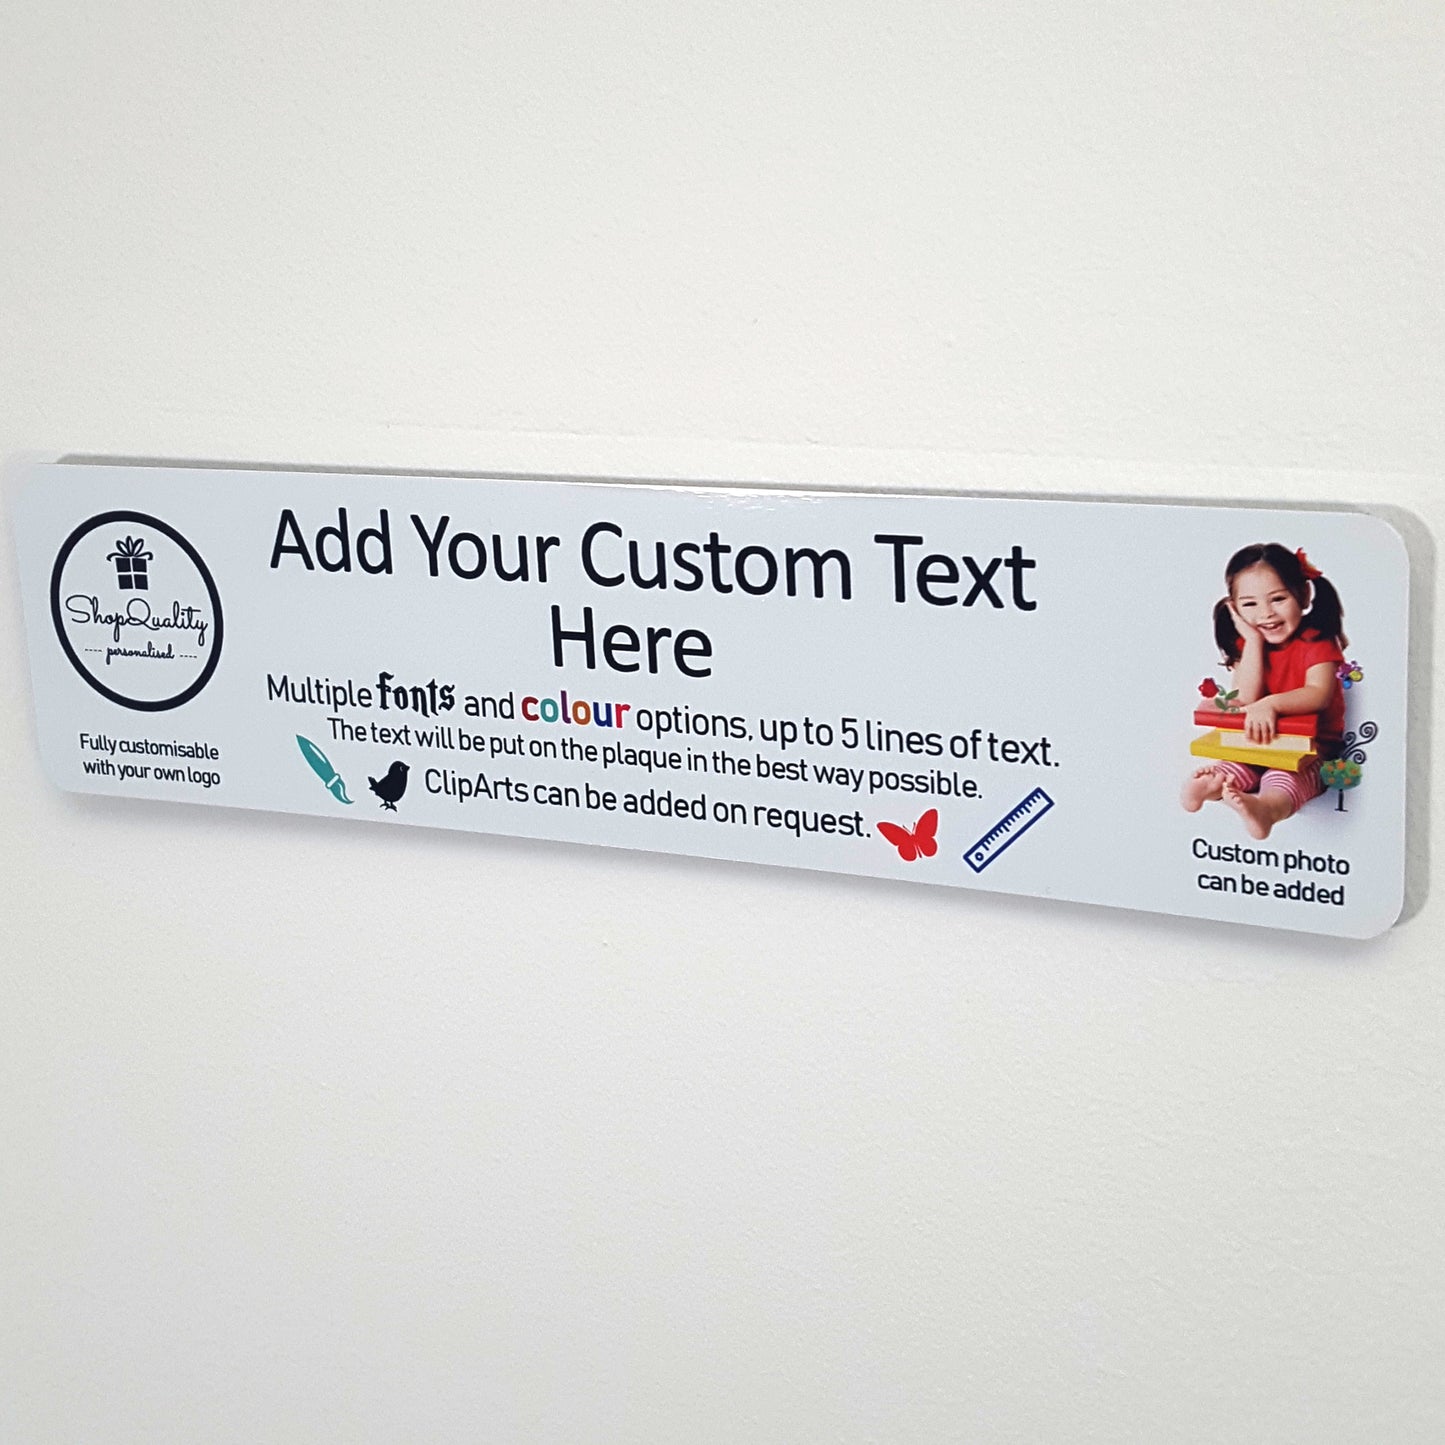 Full Customisable White Metal Plaque - Text + Pictures (20x5 cm, 7.8x2 inches)